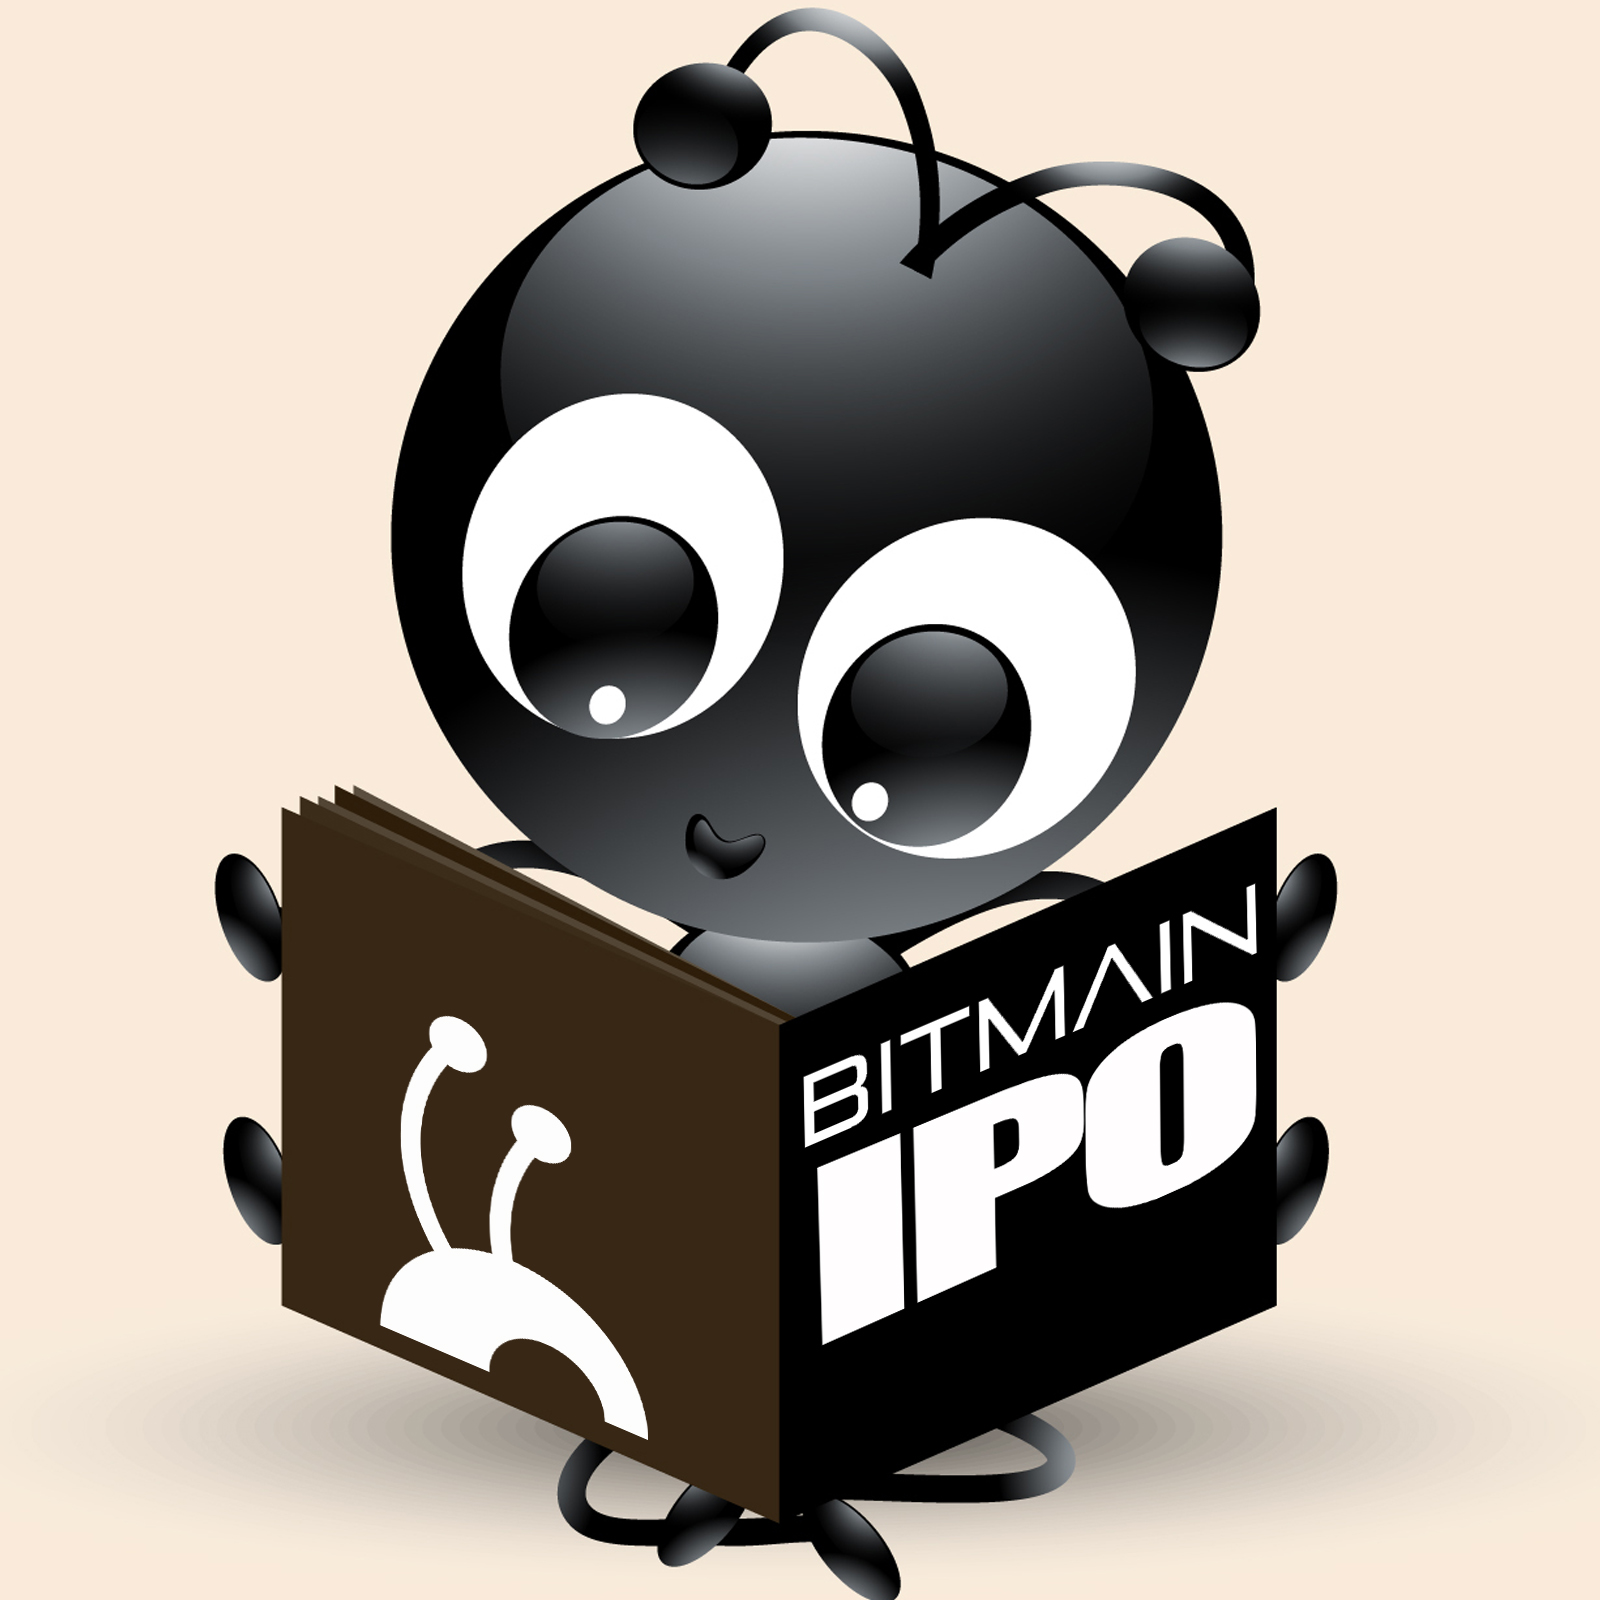 Bitmain Bids for Public Listing on the Hong Kong Stock Exchange